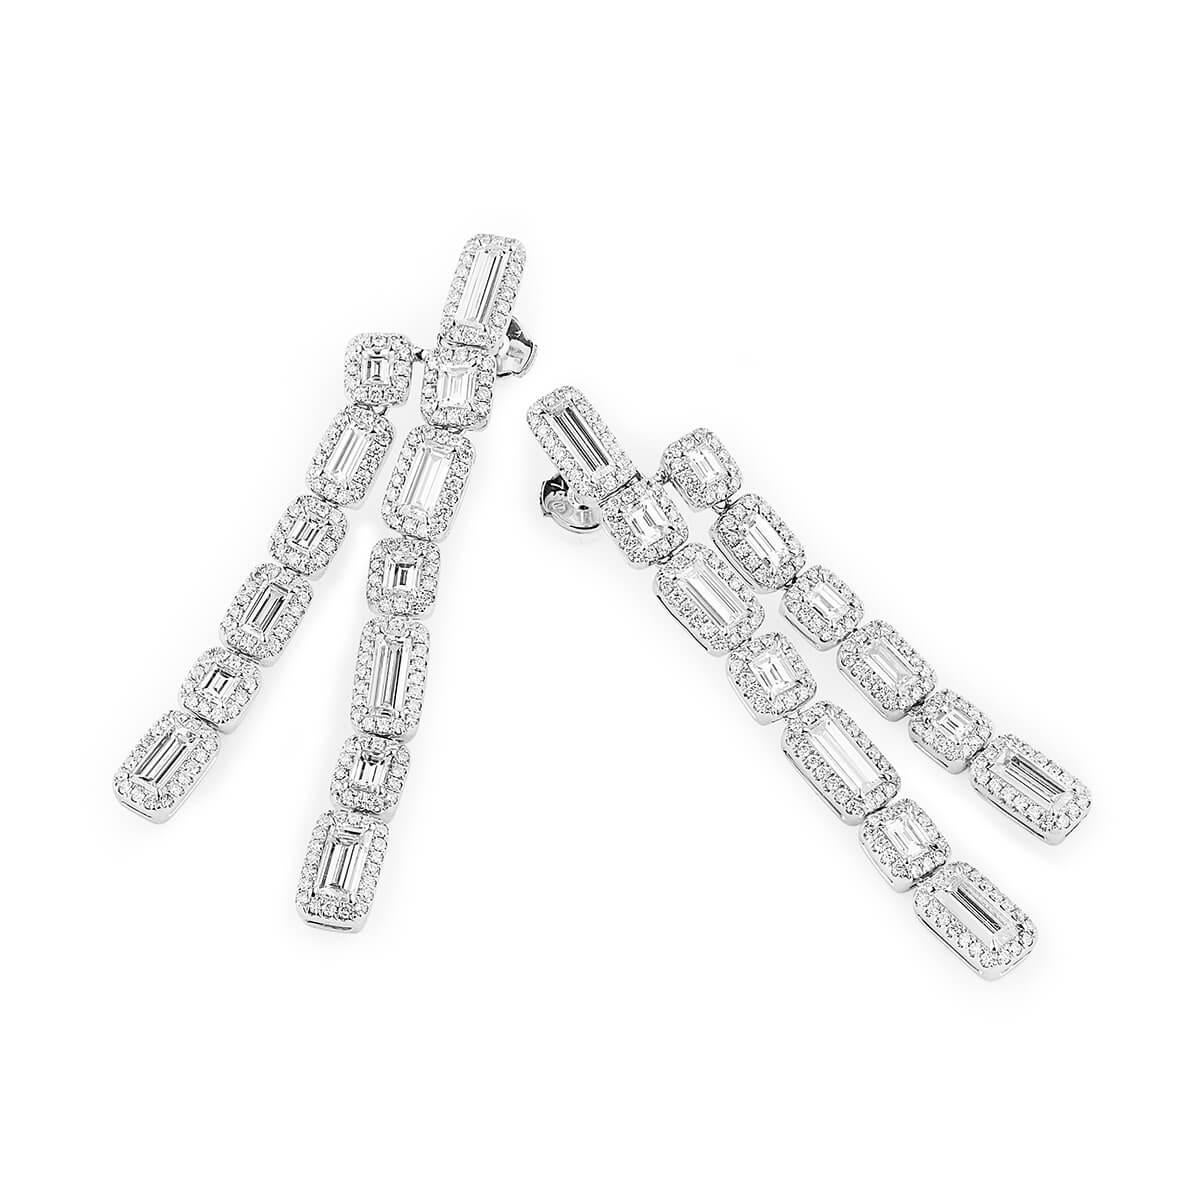 WHITE GOLD BAGUETTE AND BRILLIANT CUT DANGLE EARRINGS - 8.67 CT


Set in 18K White gold


Total baguette cut diamond weight: 6.50 ct
[ 26 diamonds]
Color: D-F
Clarity: VS

Total brilliant cut diamond weight: 2.17 ct
[ 456 diamonds ]
Color: